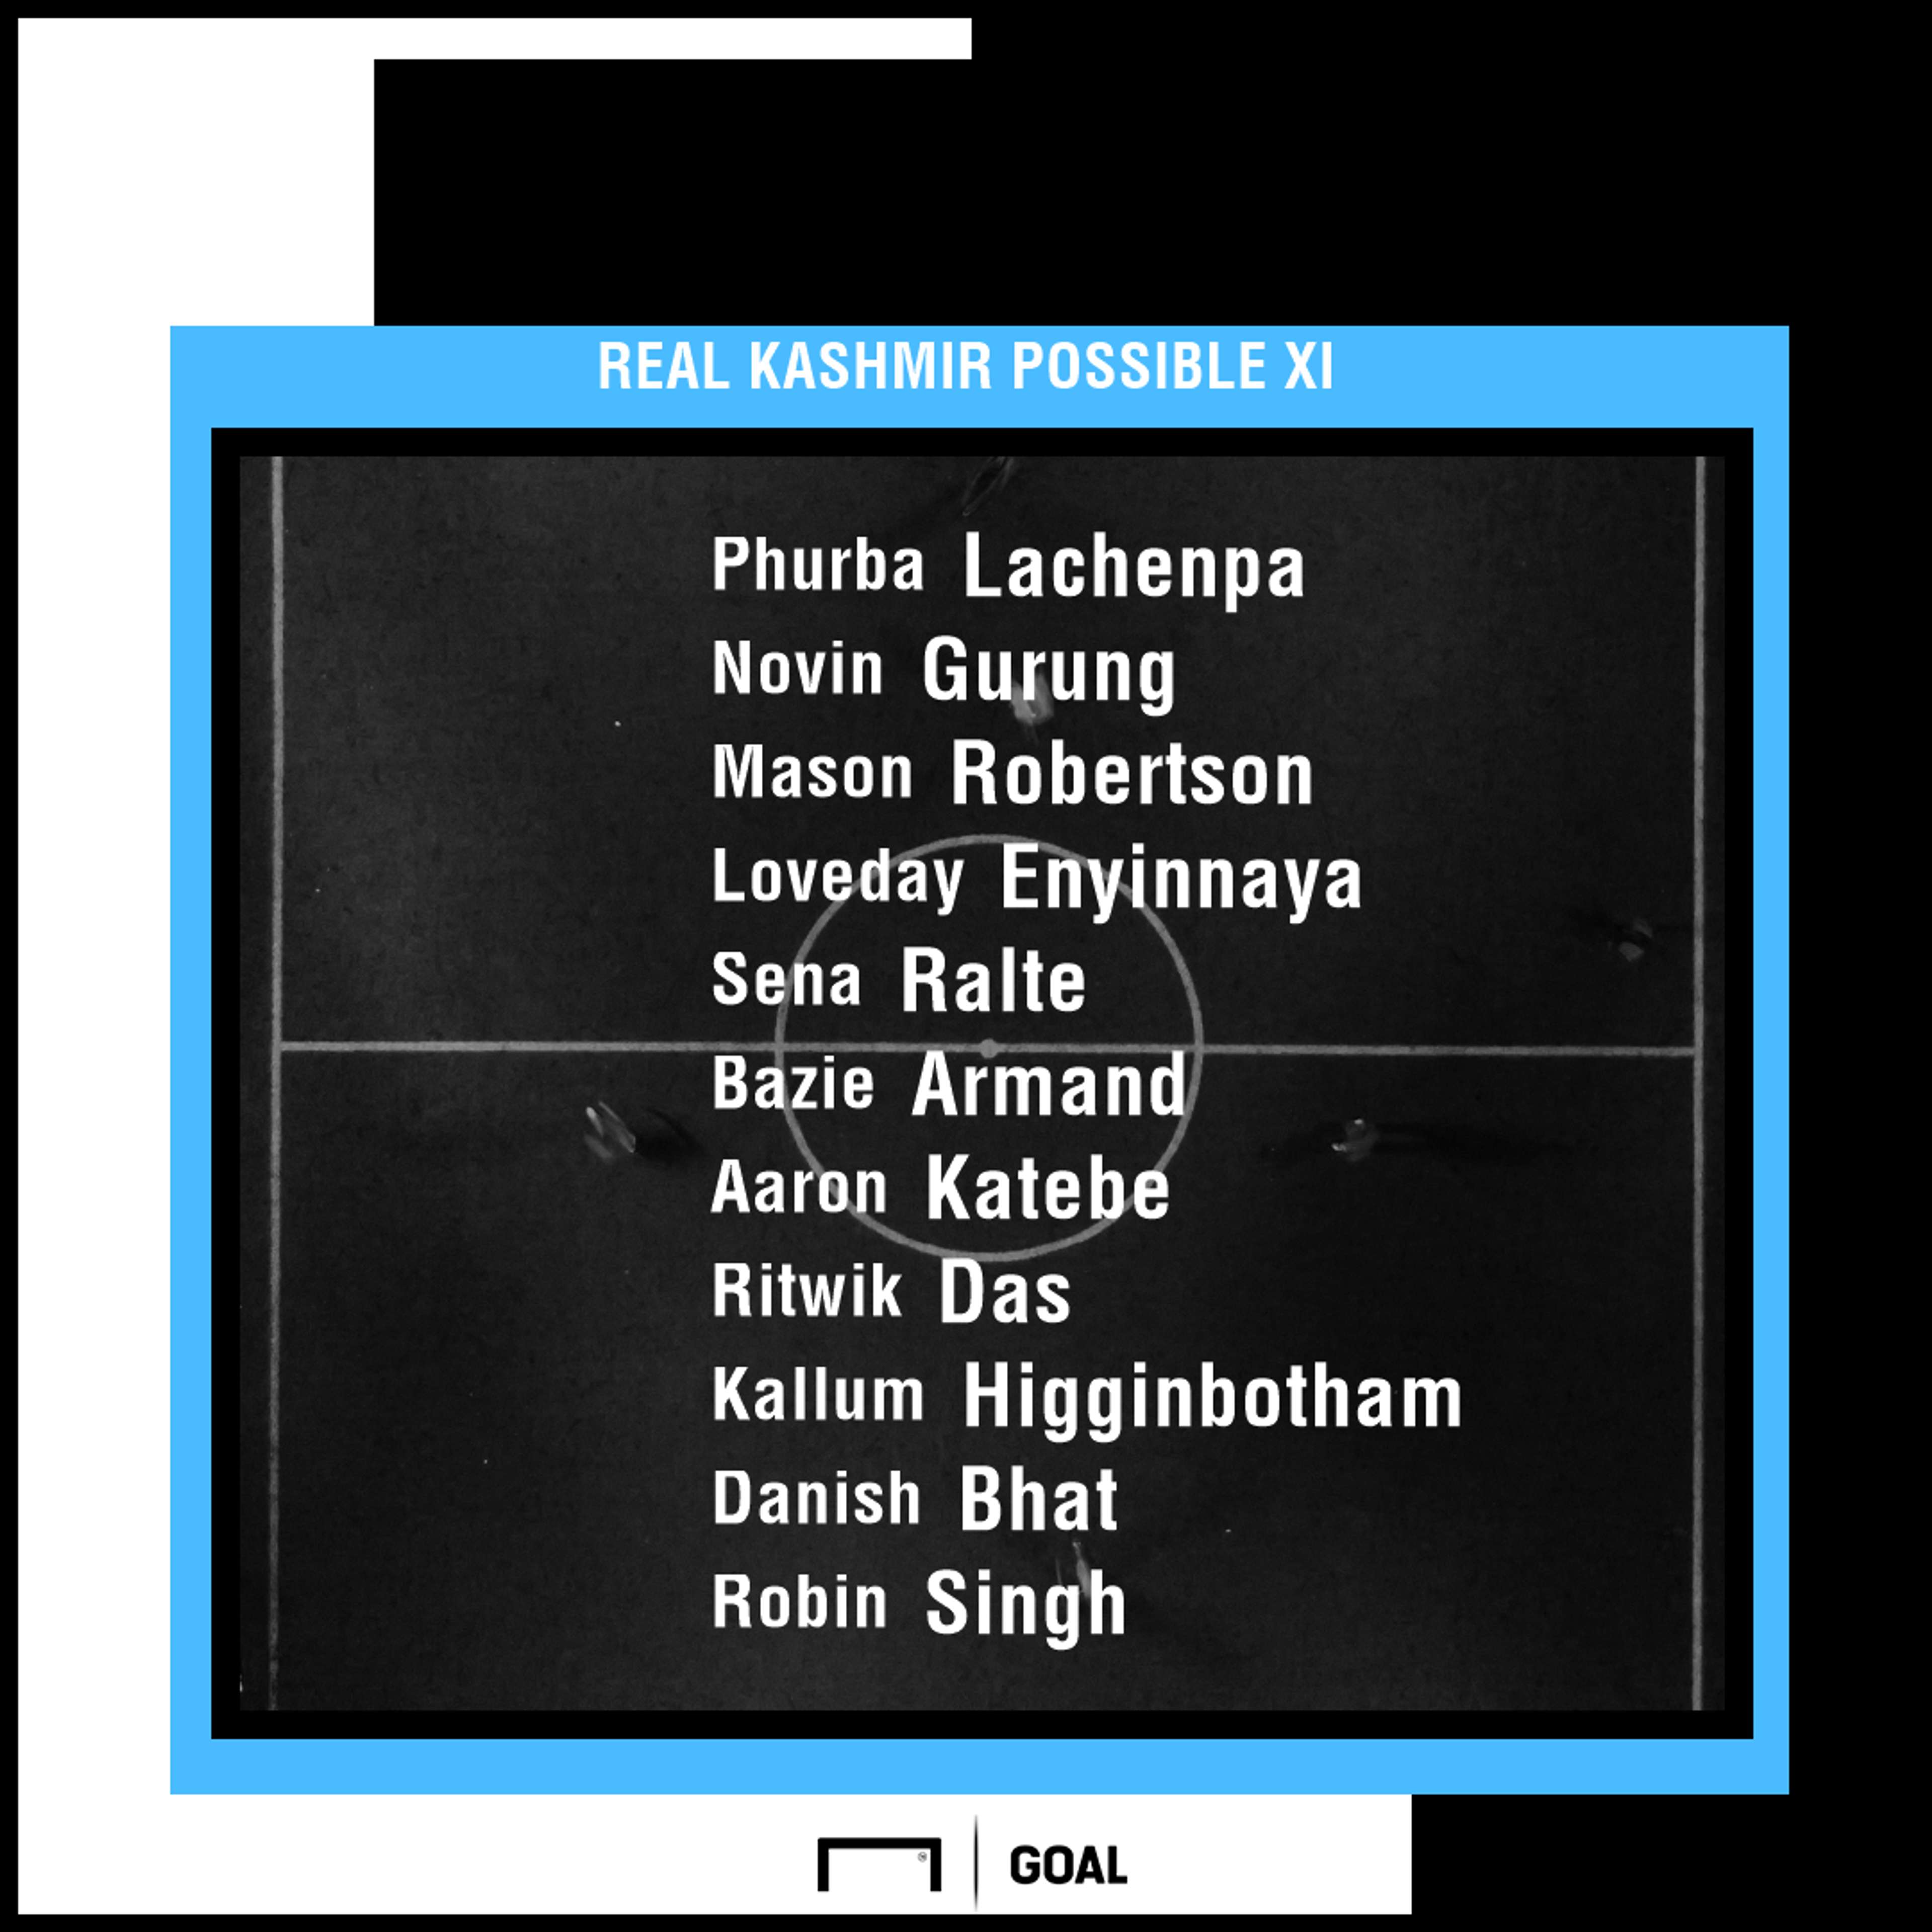 Real Kashmir possible XI